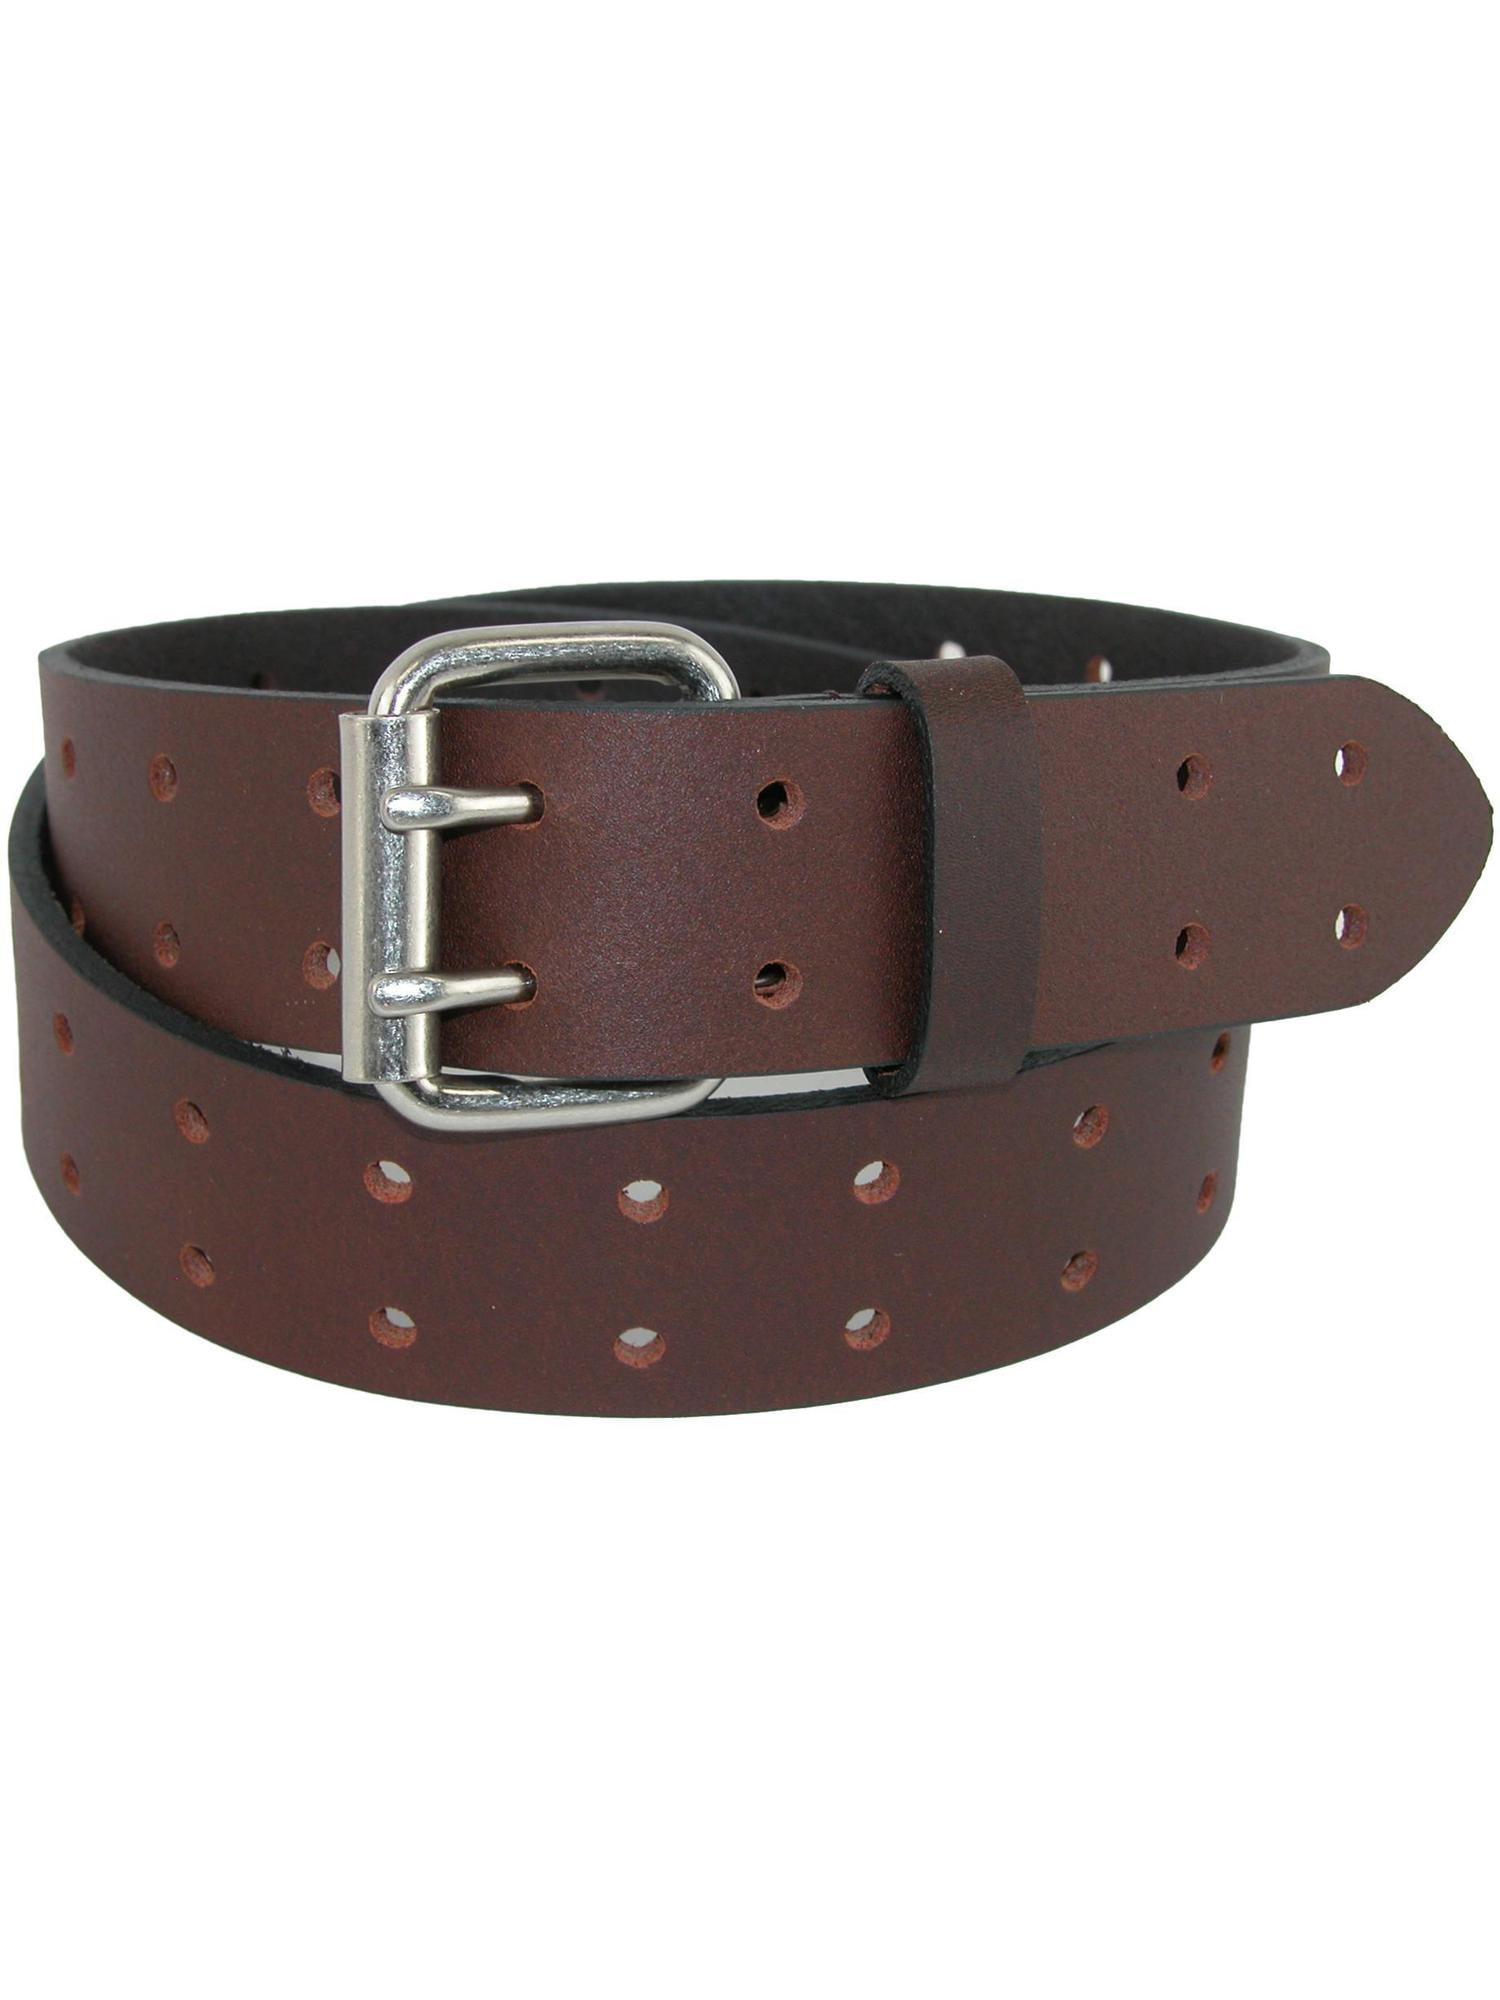 DICKIES BELT MENS LEATHER BELT TWO HOLE DOUBLE PRONG BRIDLE WORK BELT INDUSTRIAL 